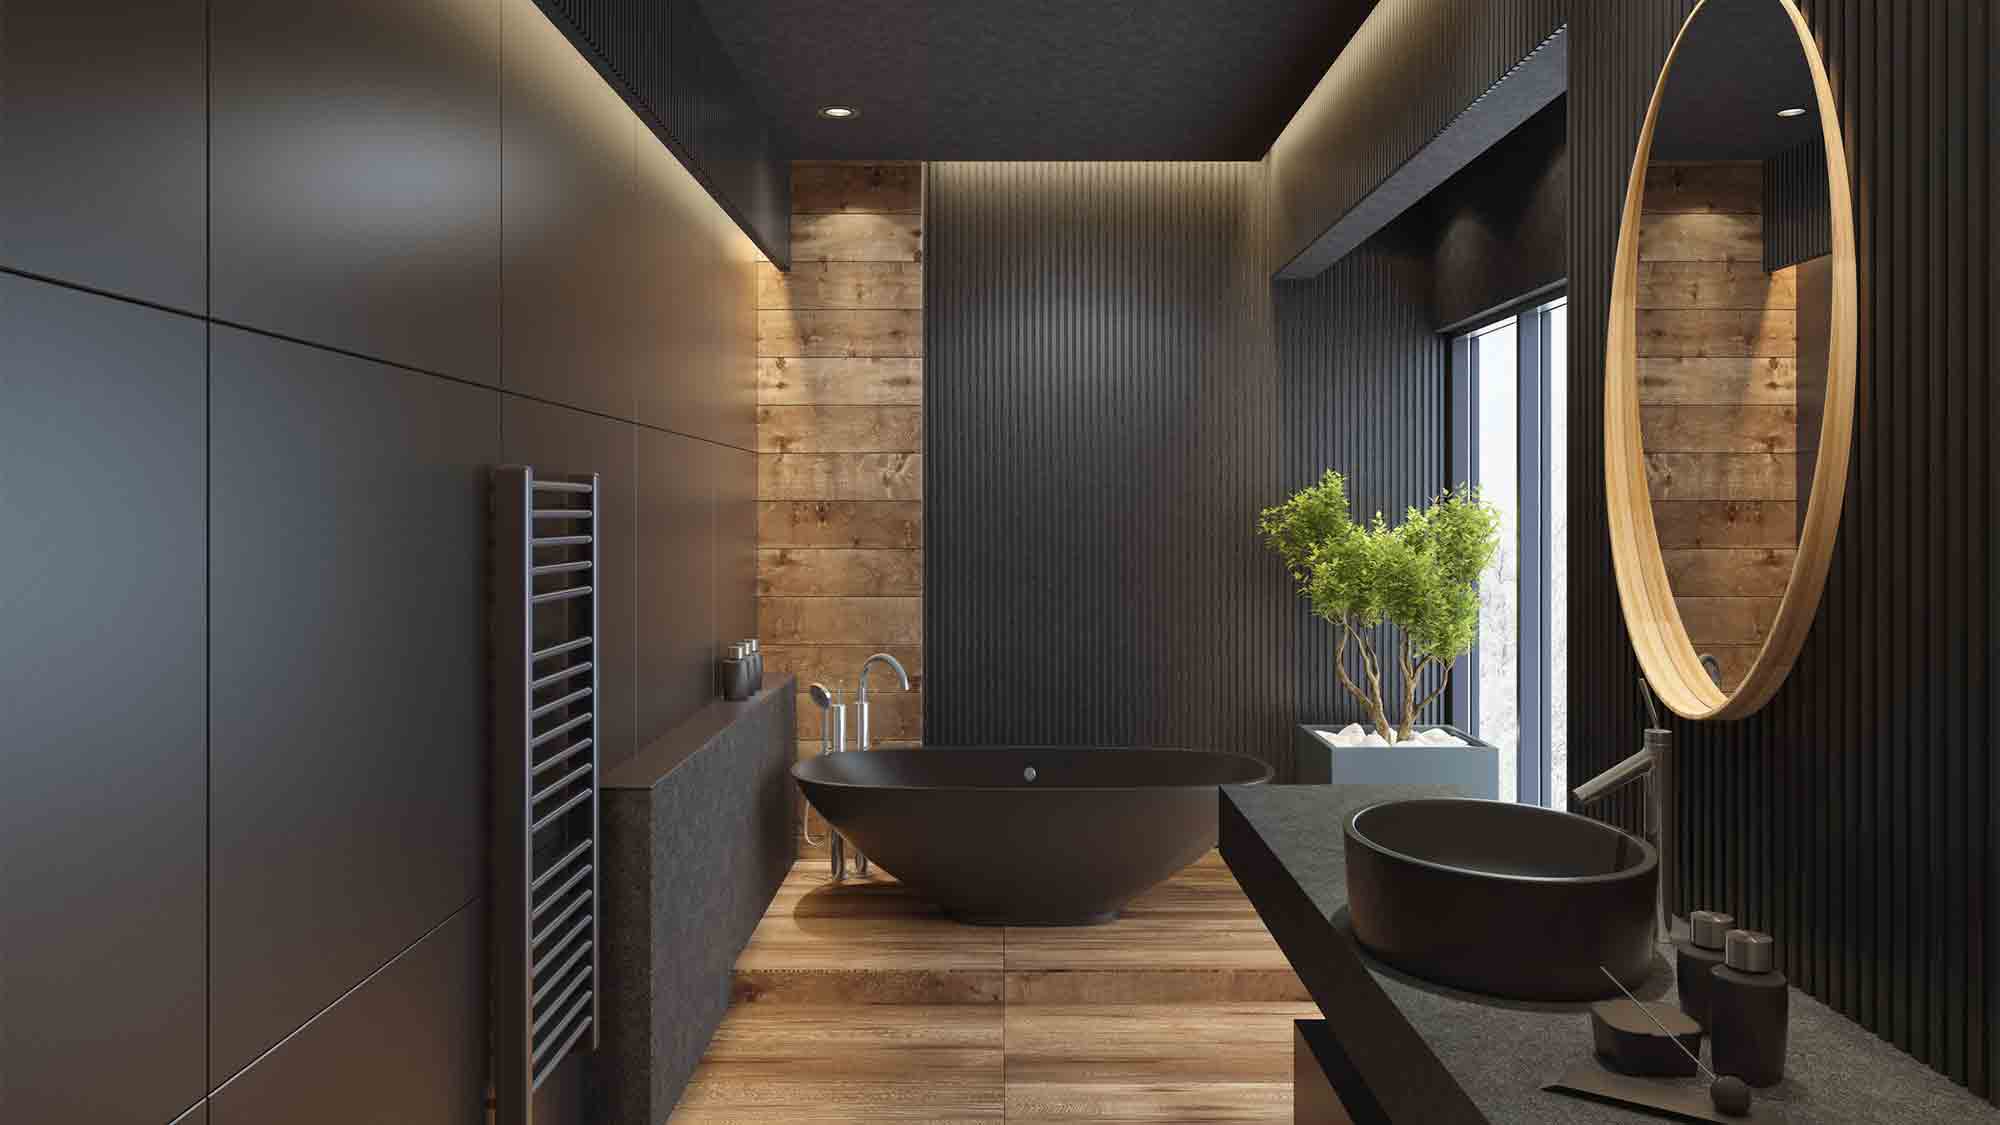 For a stylish bathroom renovation in Auckland, contact Dynamic Plumbing Works